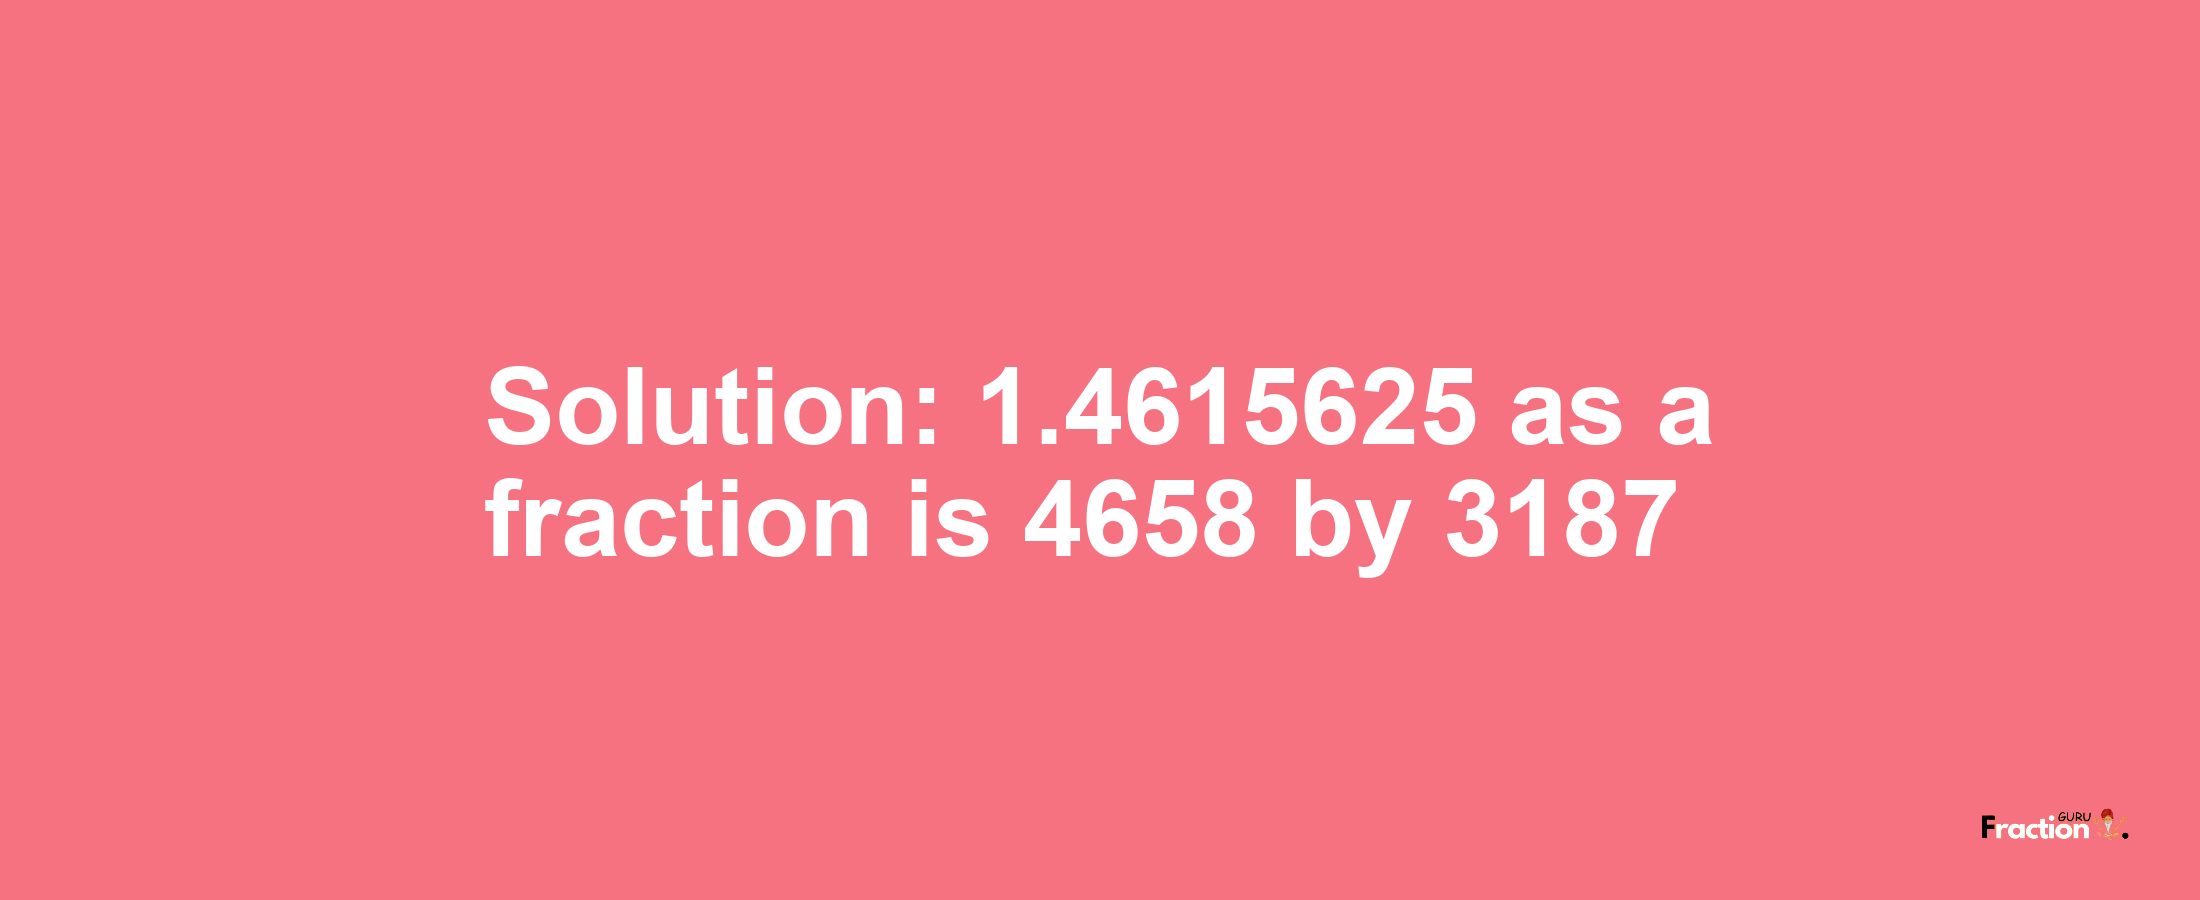 Solution:1.4615625 as a fraction is 4658/3187